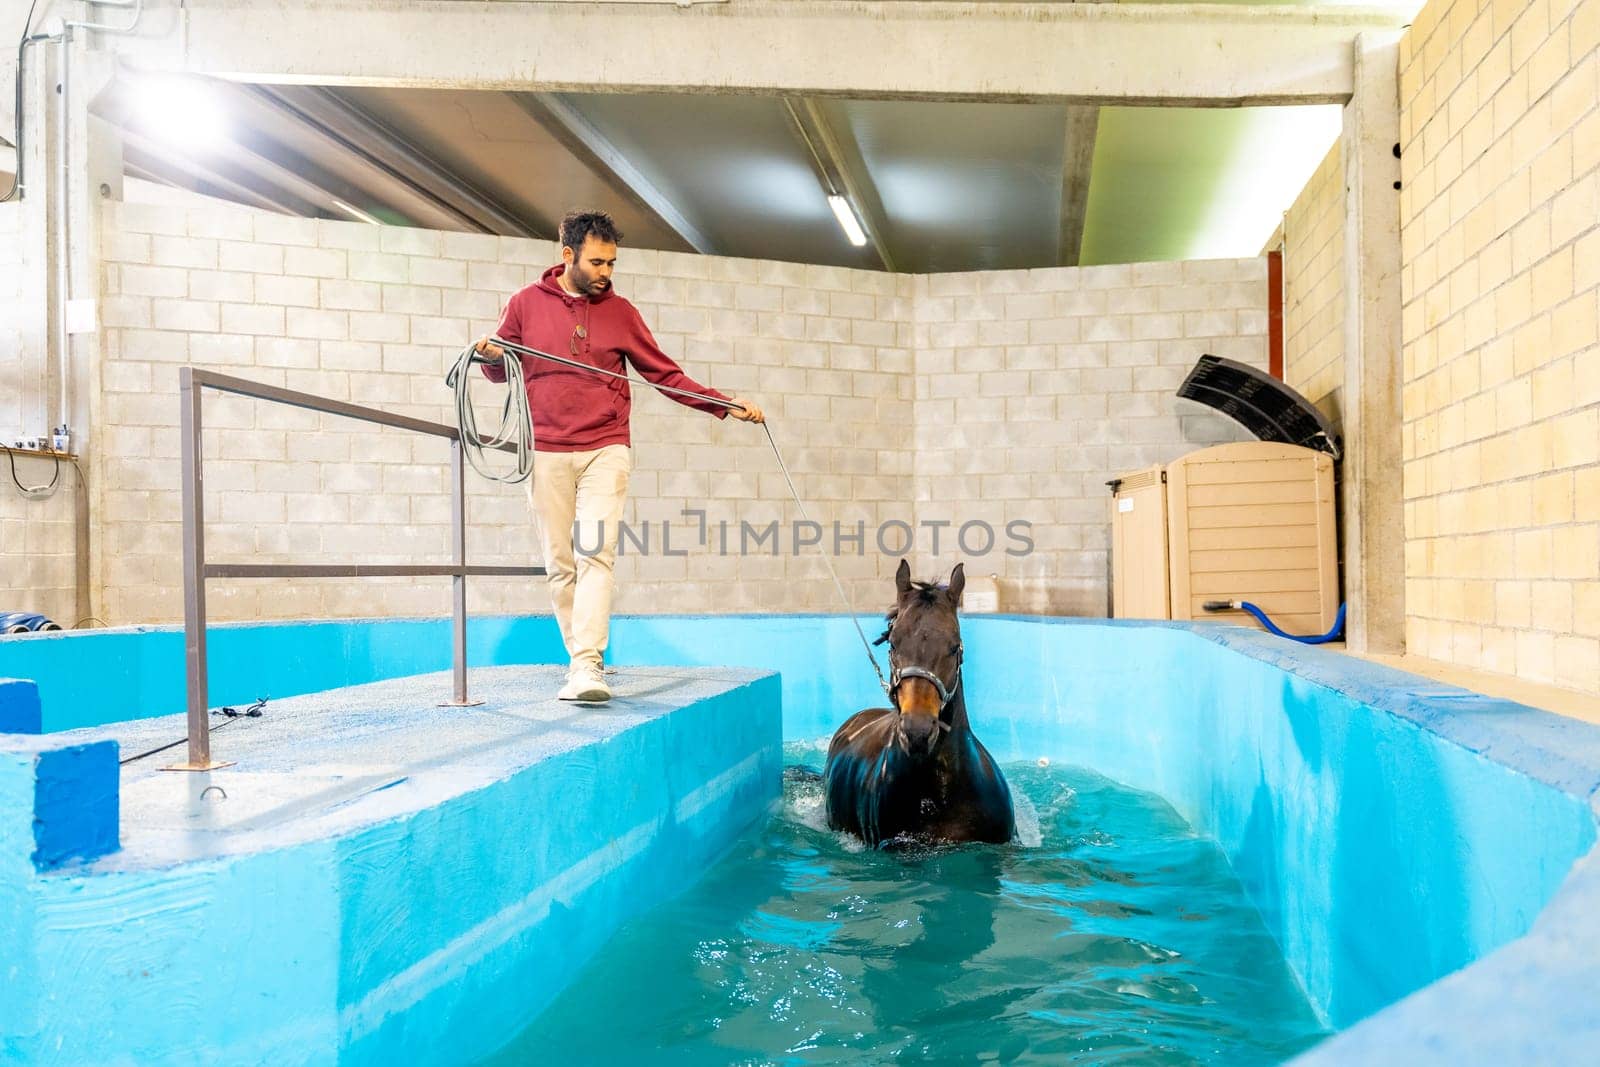 Veterinary holding a horse inside a pool during rehabilitation session with water